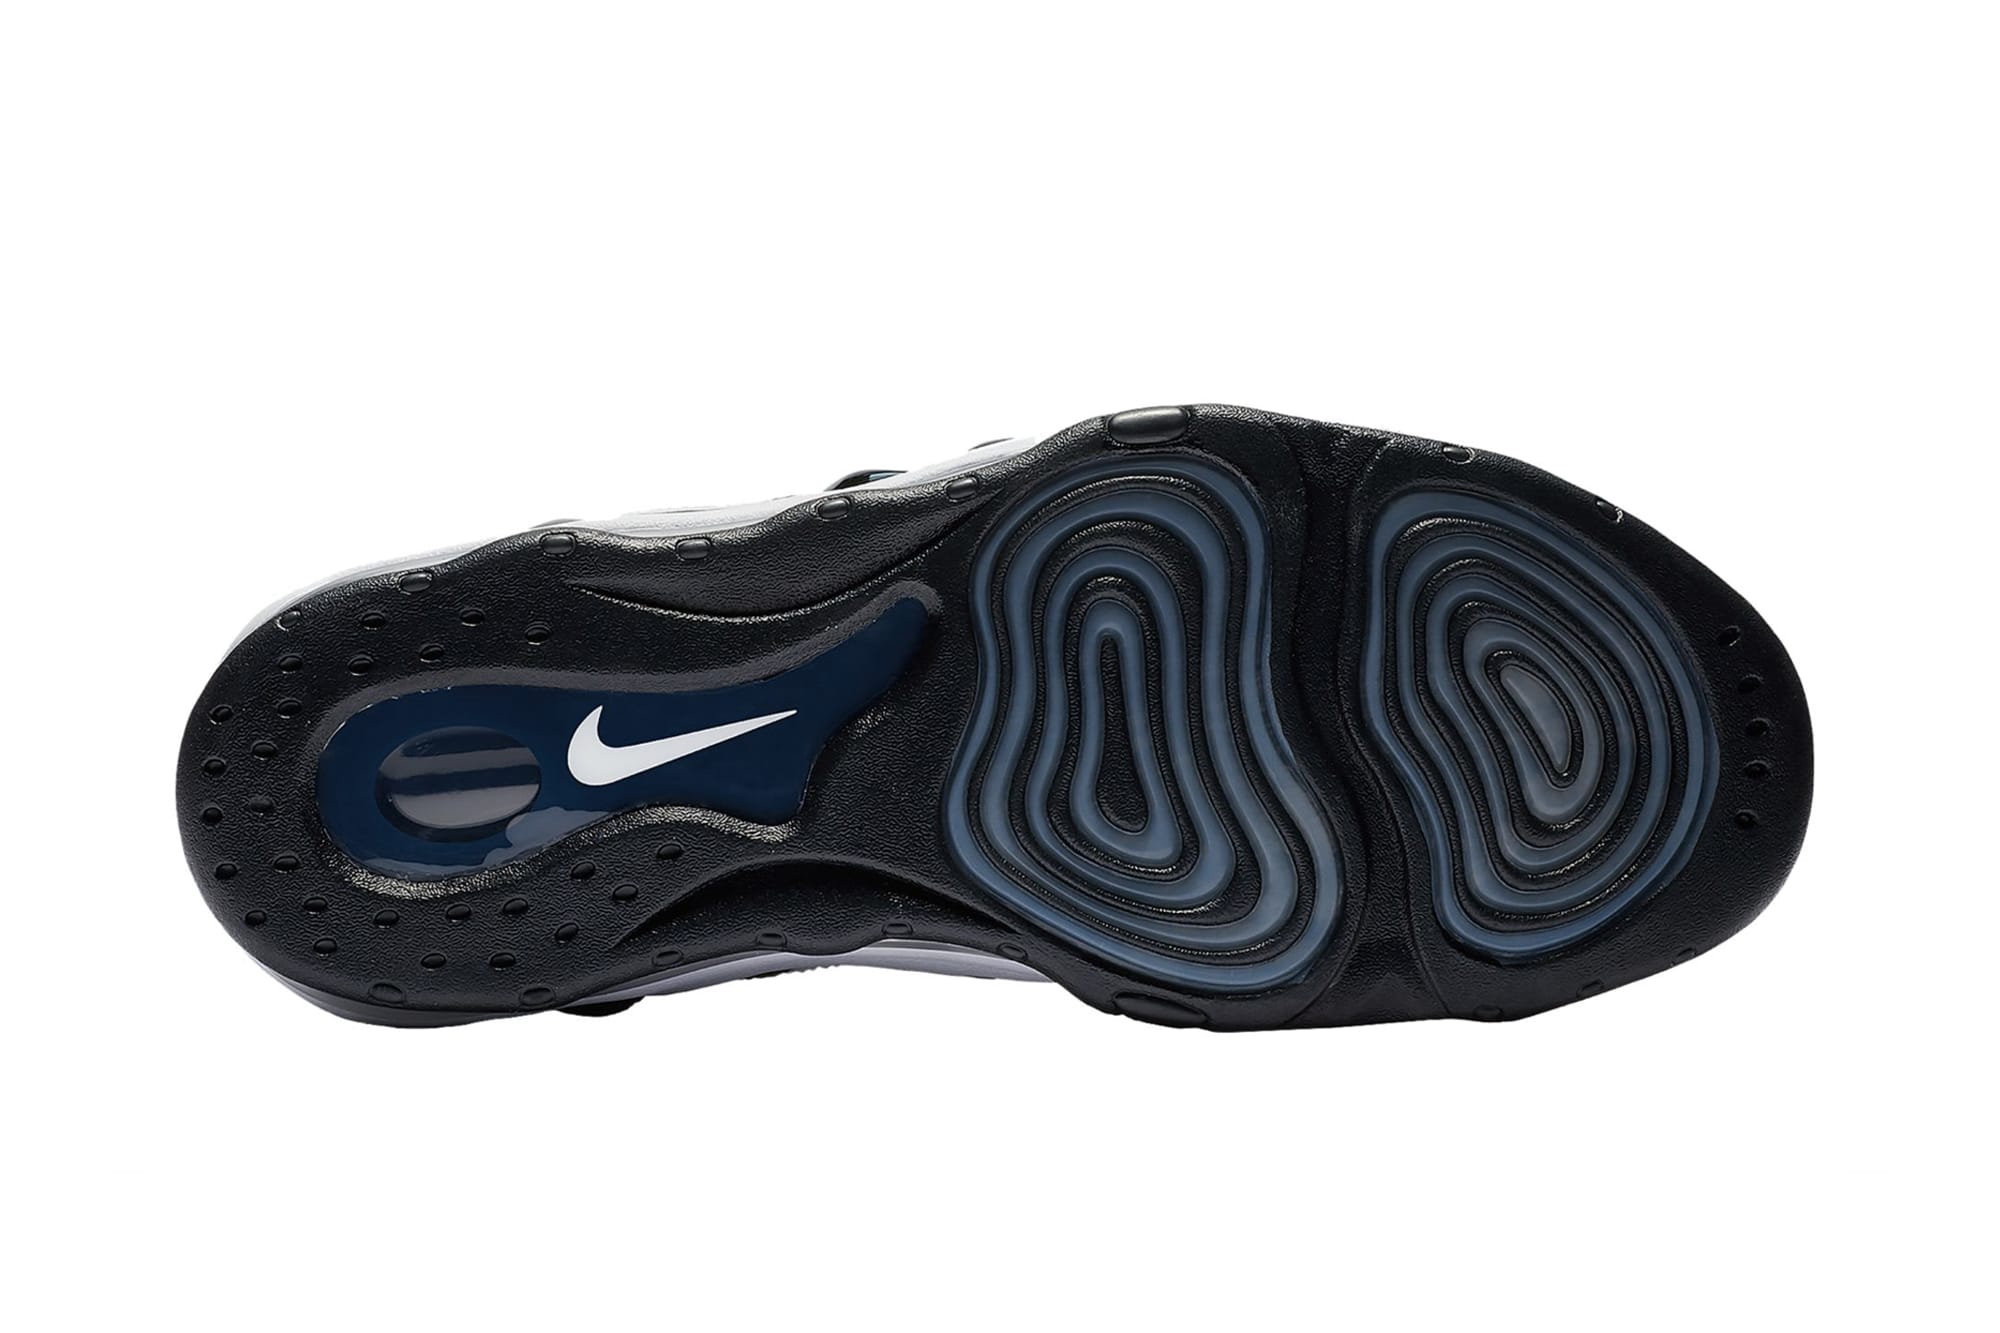 nike air max uptempo 97 white black college navy